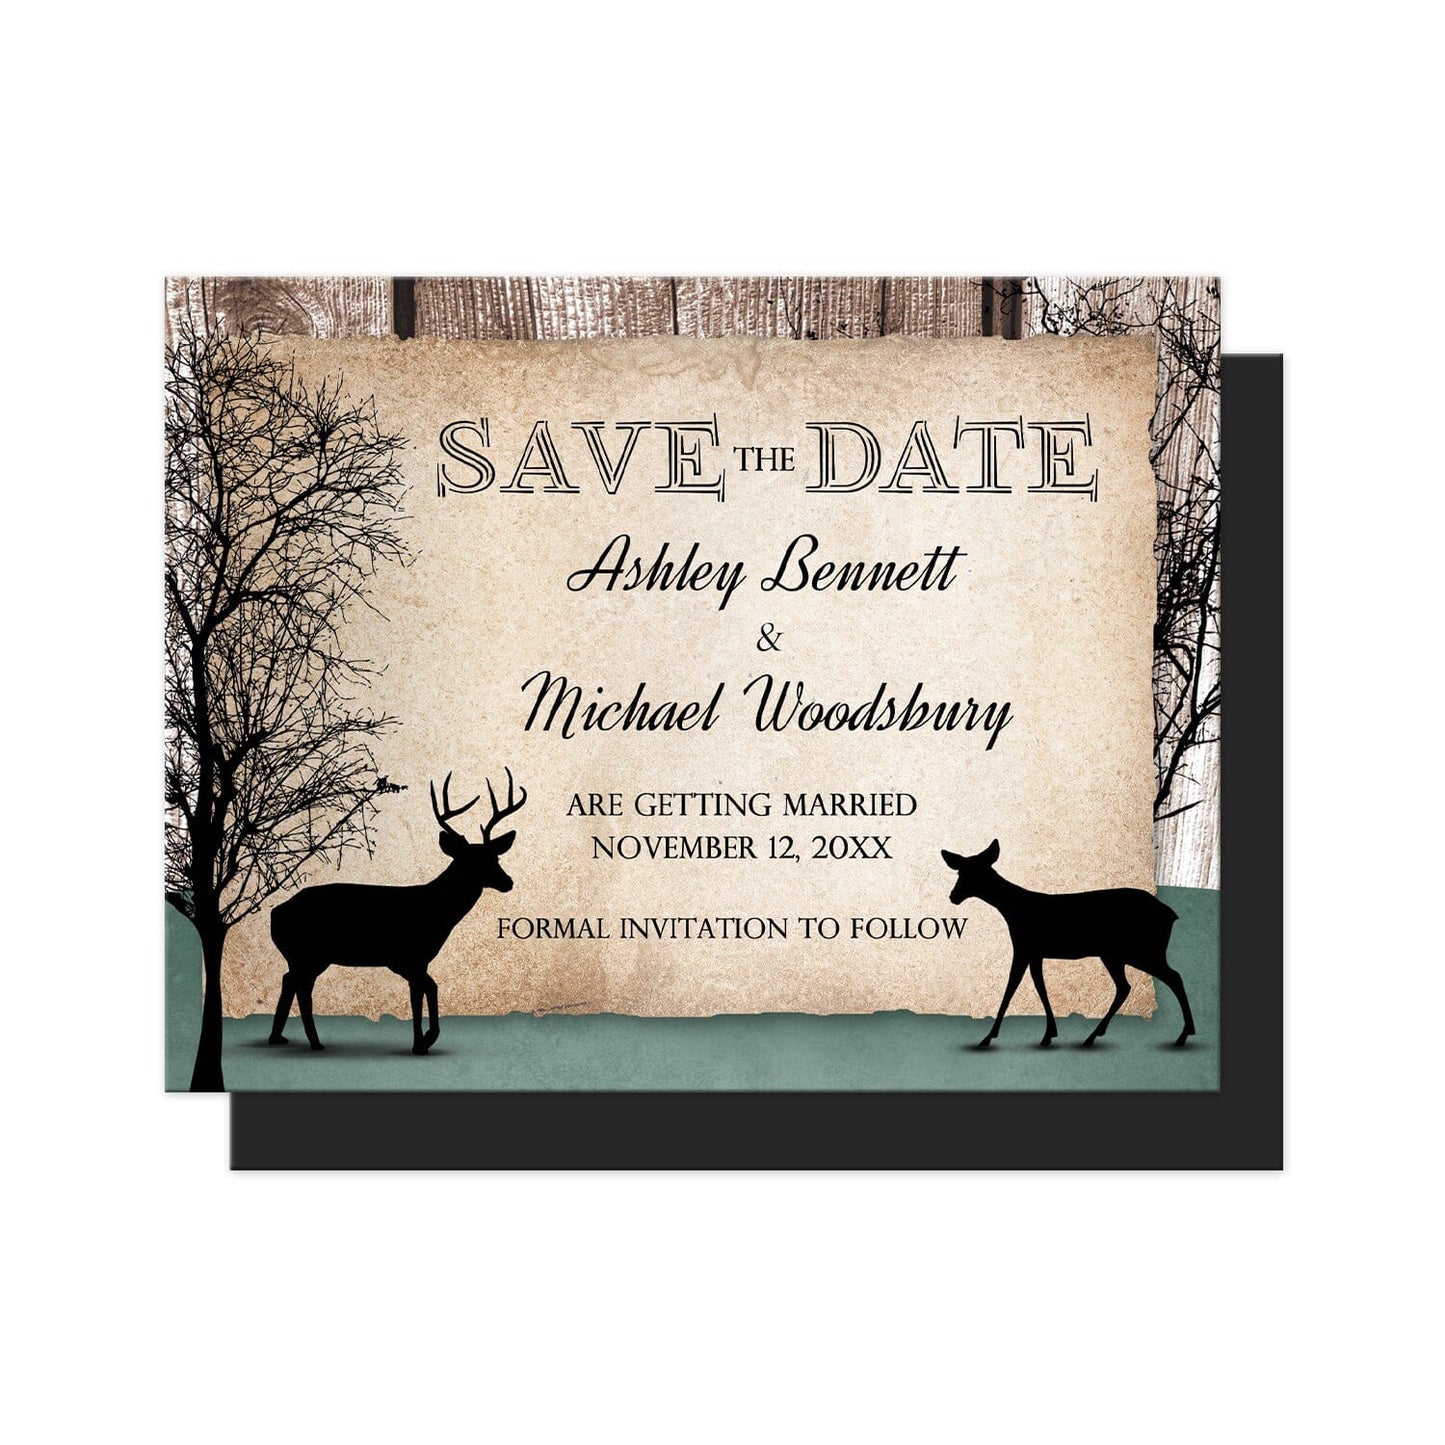 Rustic Woodsy Deer Save the Date Magnets at Artistically Invited. Rustic woodsy deer save the date magnets designed with silhouettes of a buck deer with antlers, a doe, and winter trees over a wood brown background and a faded hunter green design along the bottom. Your personalized wedding date details are custom printed in black over a tattered rustic paper illustration between the deer.